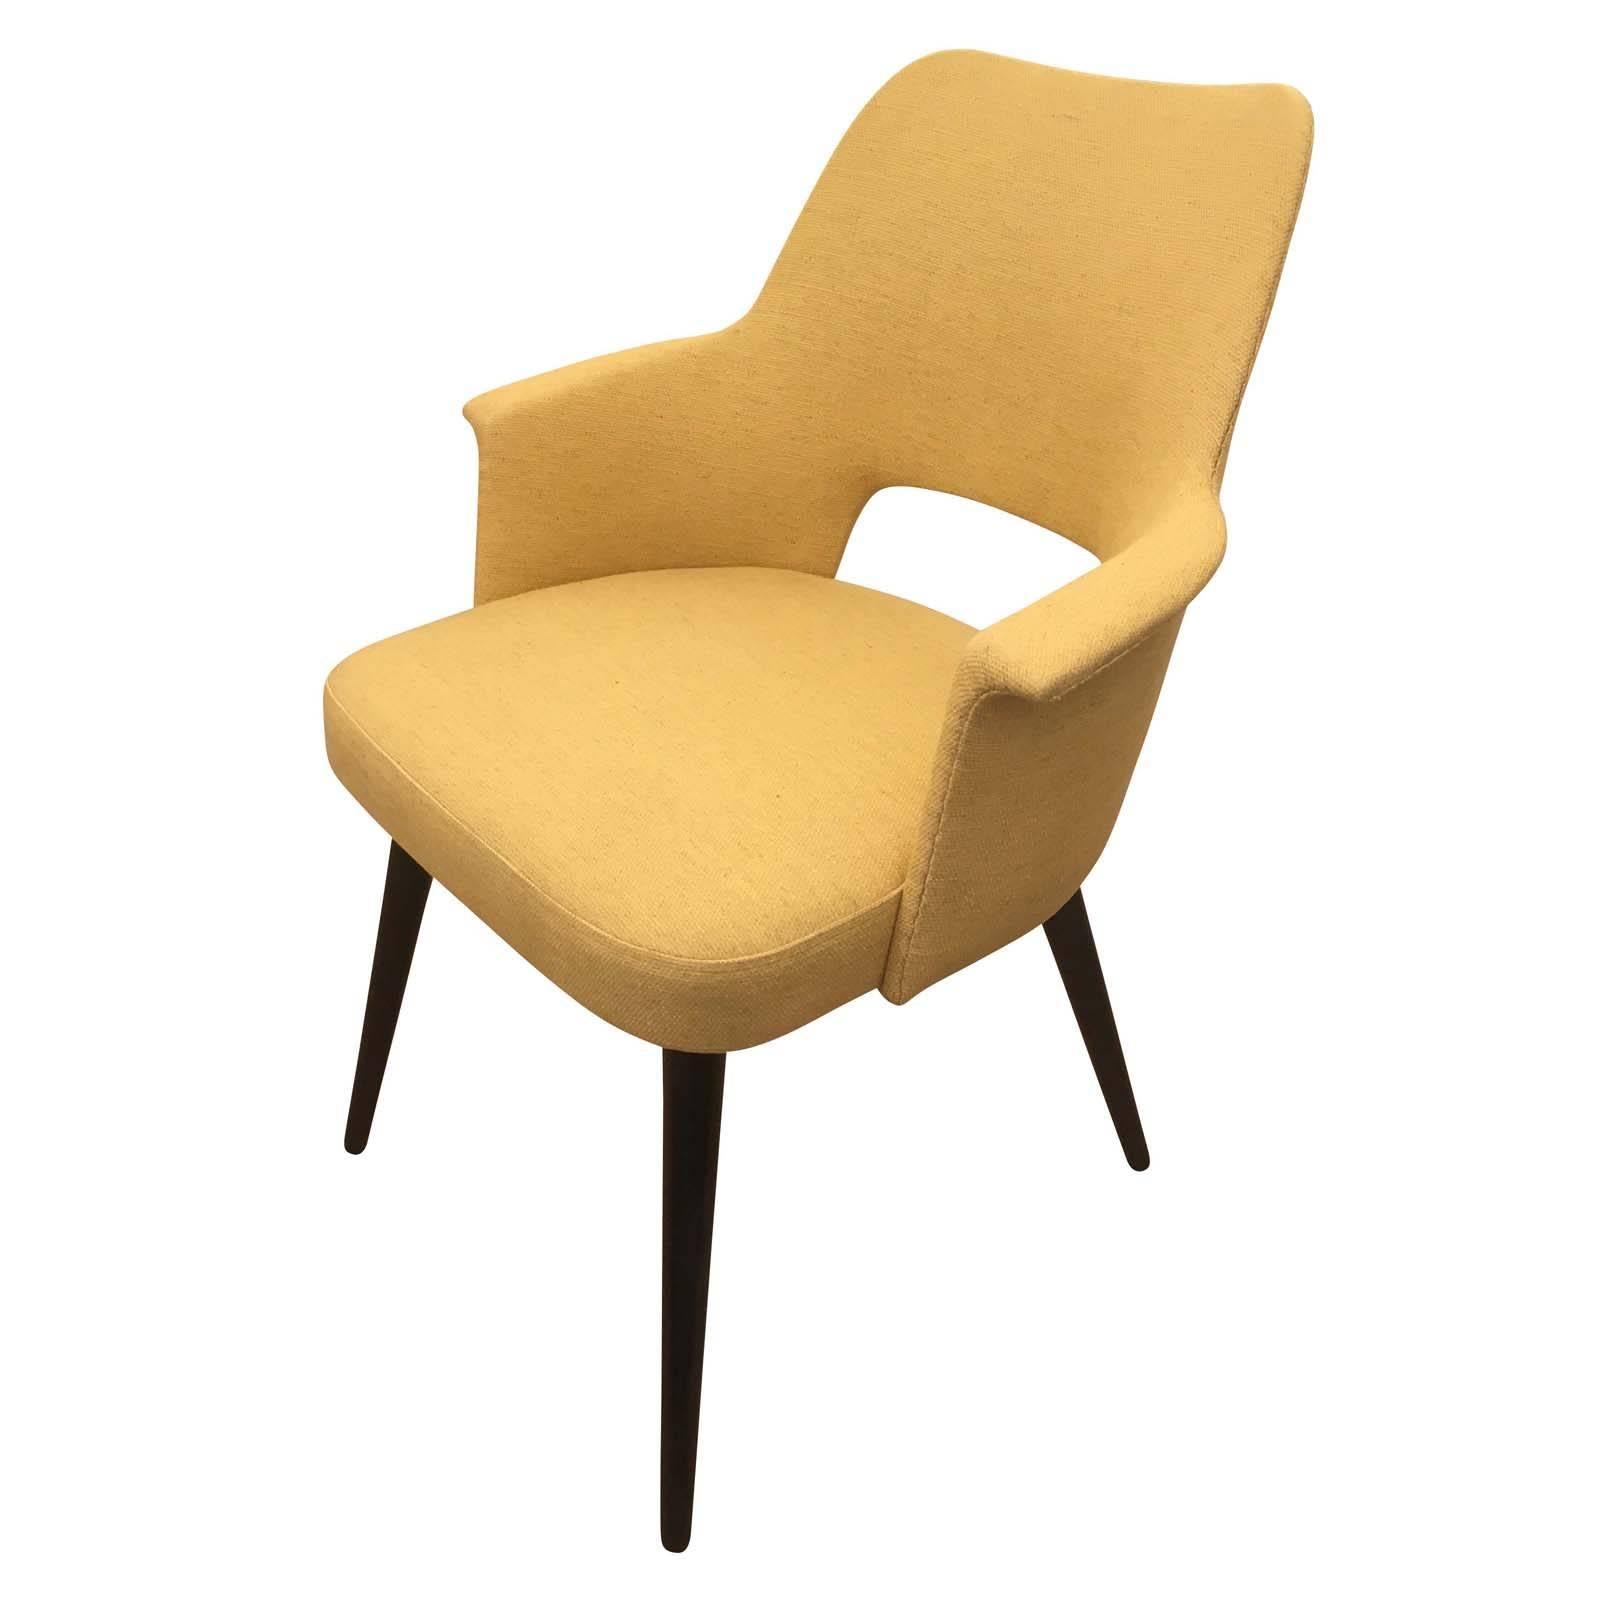 Elegant pair of chairs form the 1960s with wood legs. Can be purchased individually as accent armchairs or desk chairs. Only one has been upholstered in a yellow fabric for display purposes. Price per chair. Please contact us for upholstery options.